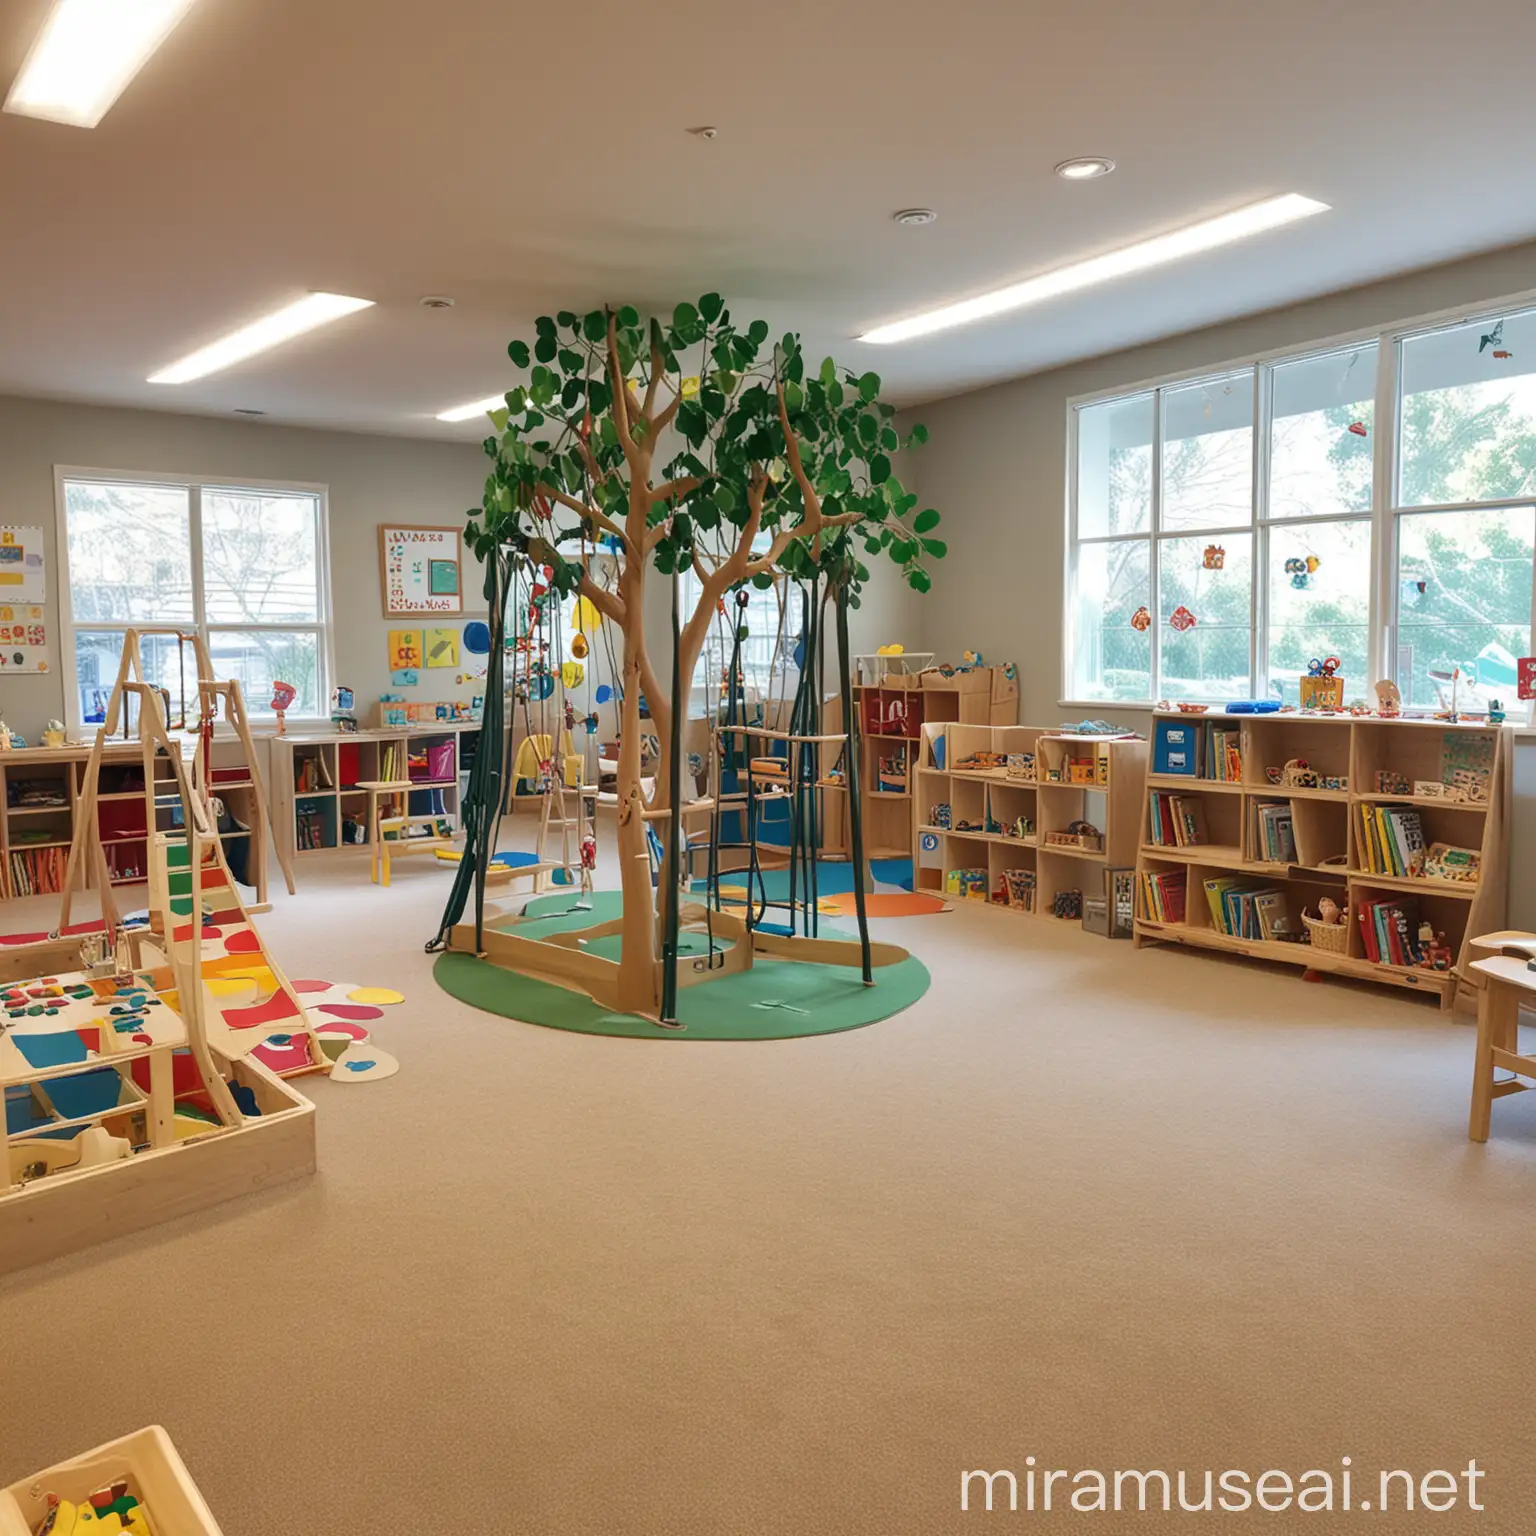 Imaginative Playschool Classroom Design with Interactive Play Areas and Safety Features